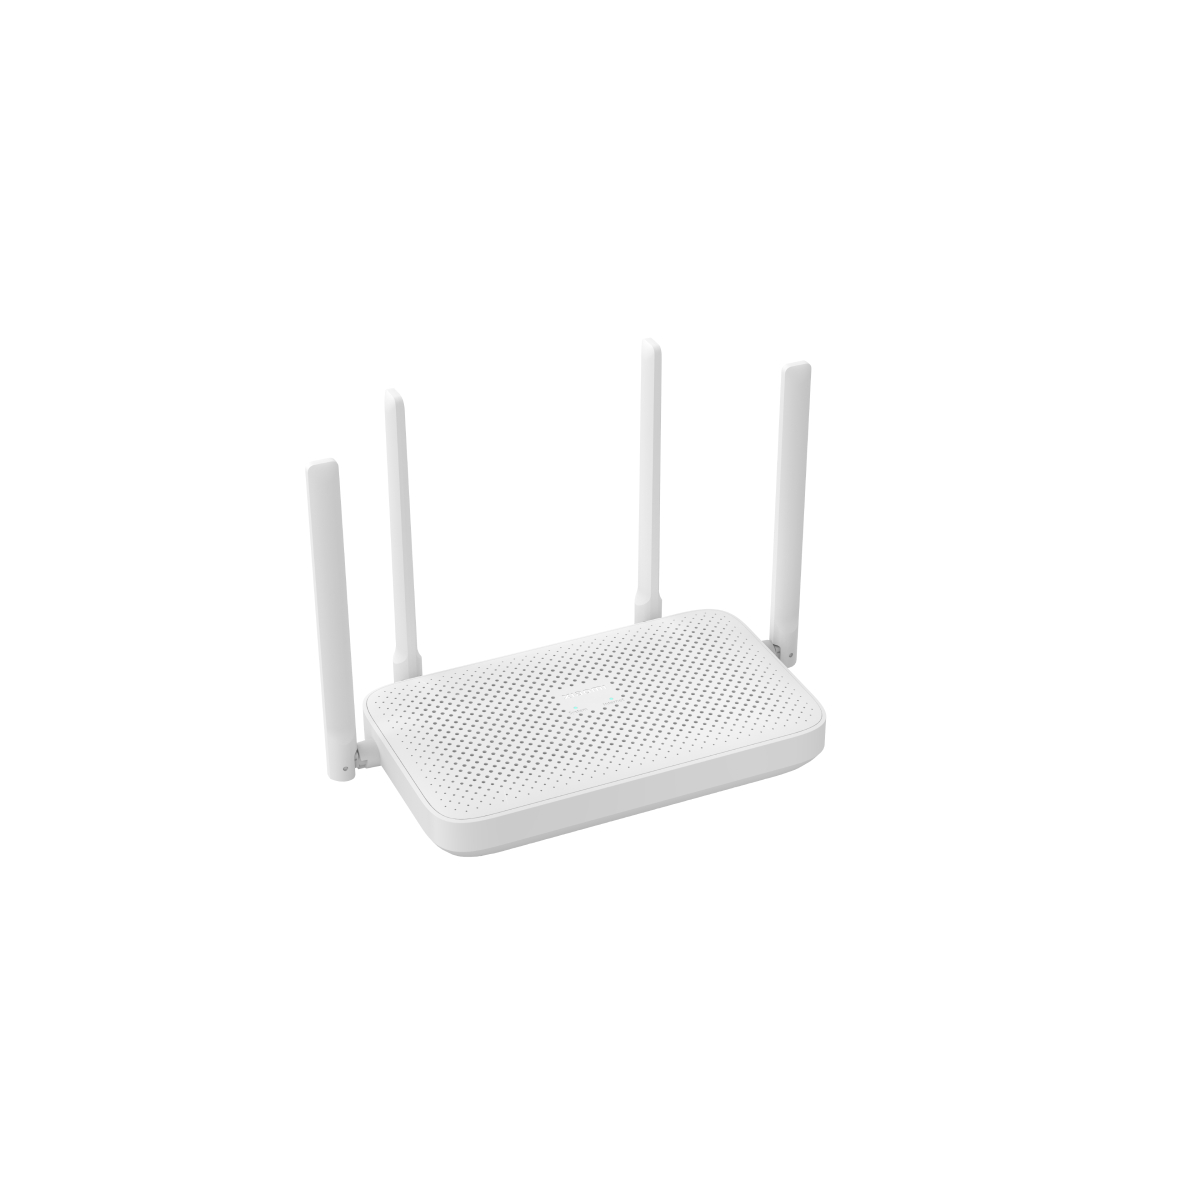 Xiaomi Router AX1500 UK, , large image number 0